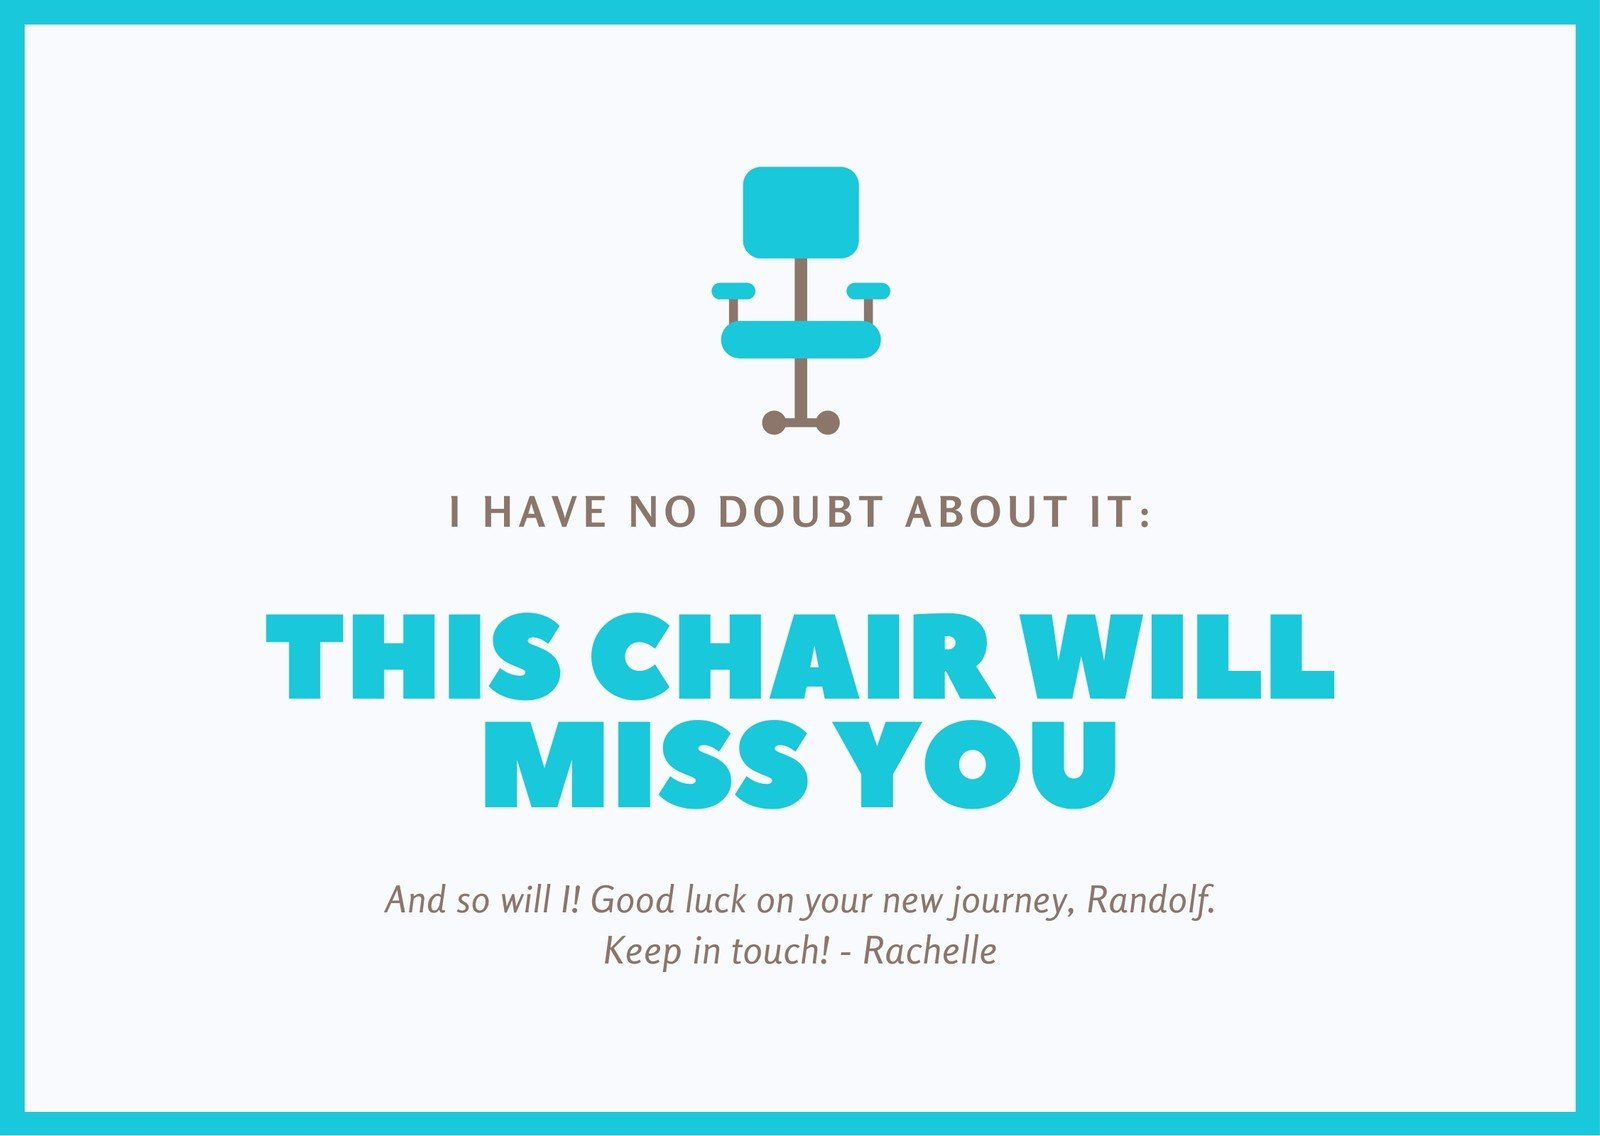 Free, Printable Farewell Card Templates To Personalize Online | Canva within Free Printable Goodbye Cards